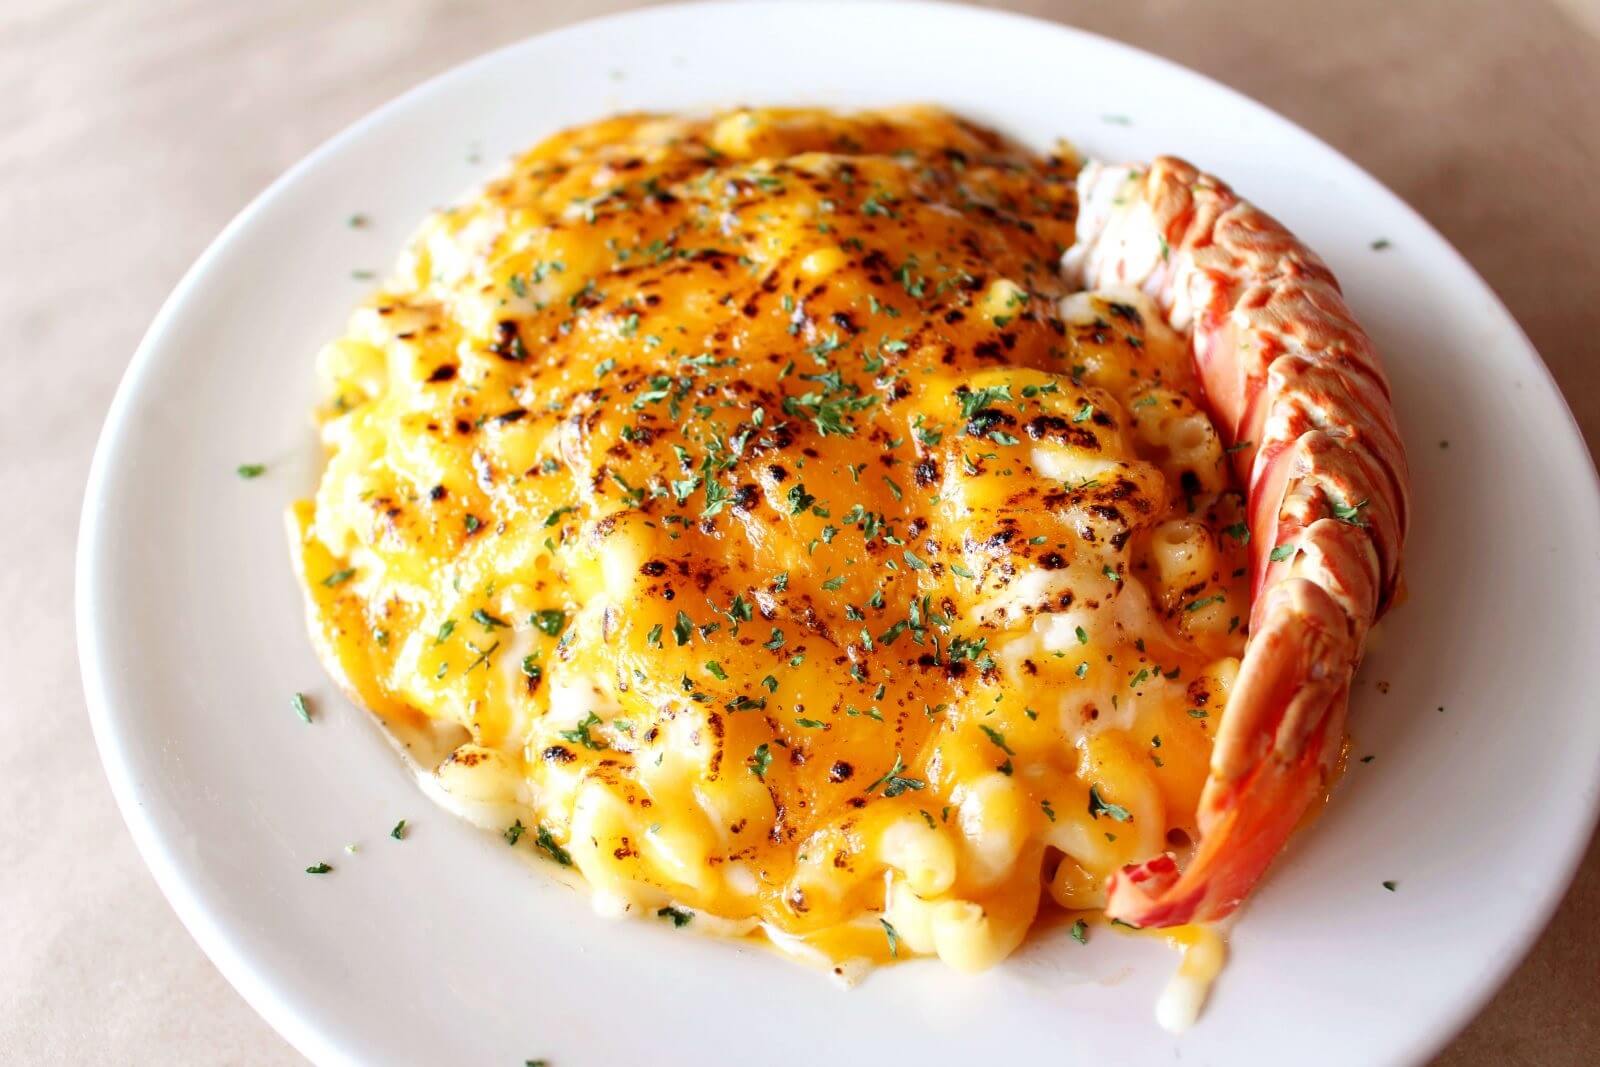 Exquisite lobster with Mac and Cheese